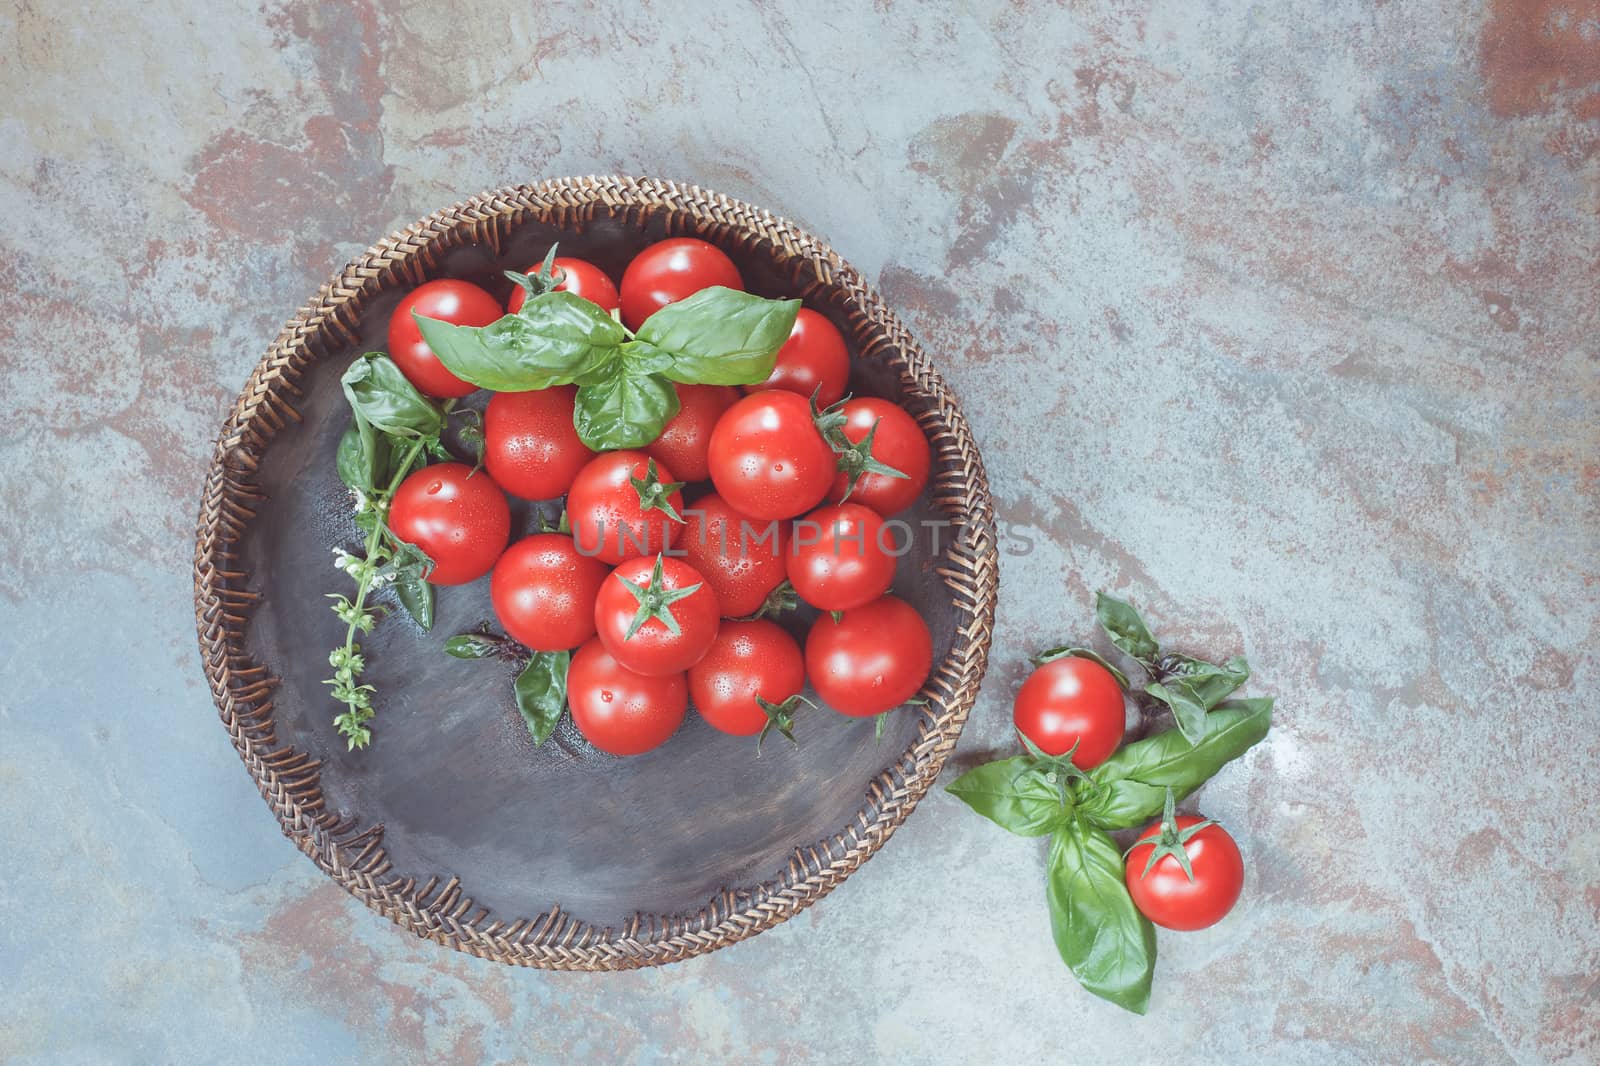 Tomatoes in a wooden bowl on rustic table. Overhead view with retro style processing. Natural light